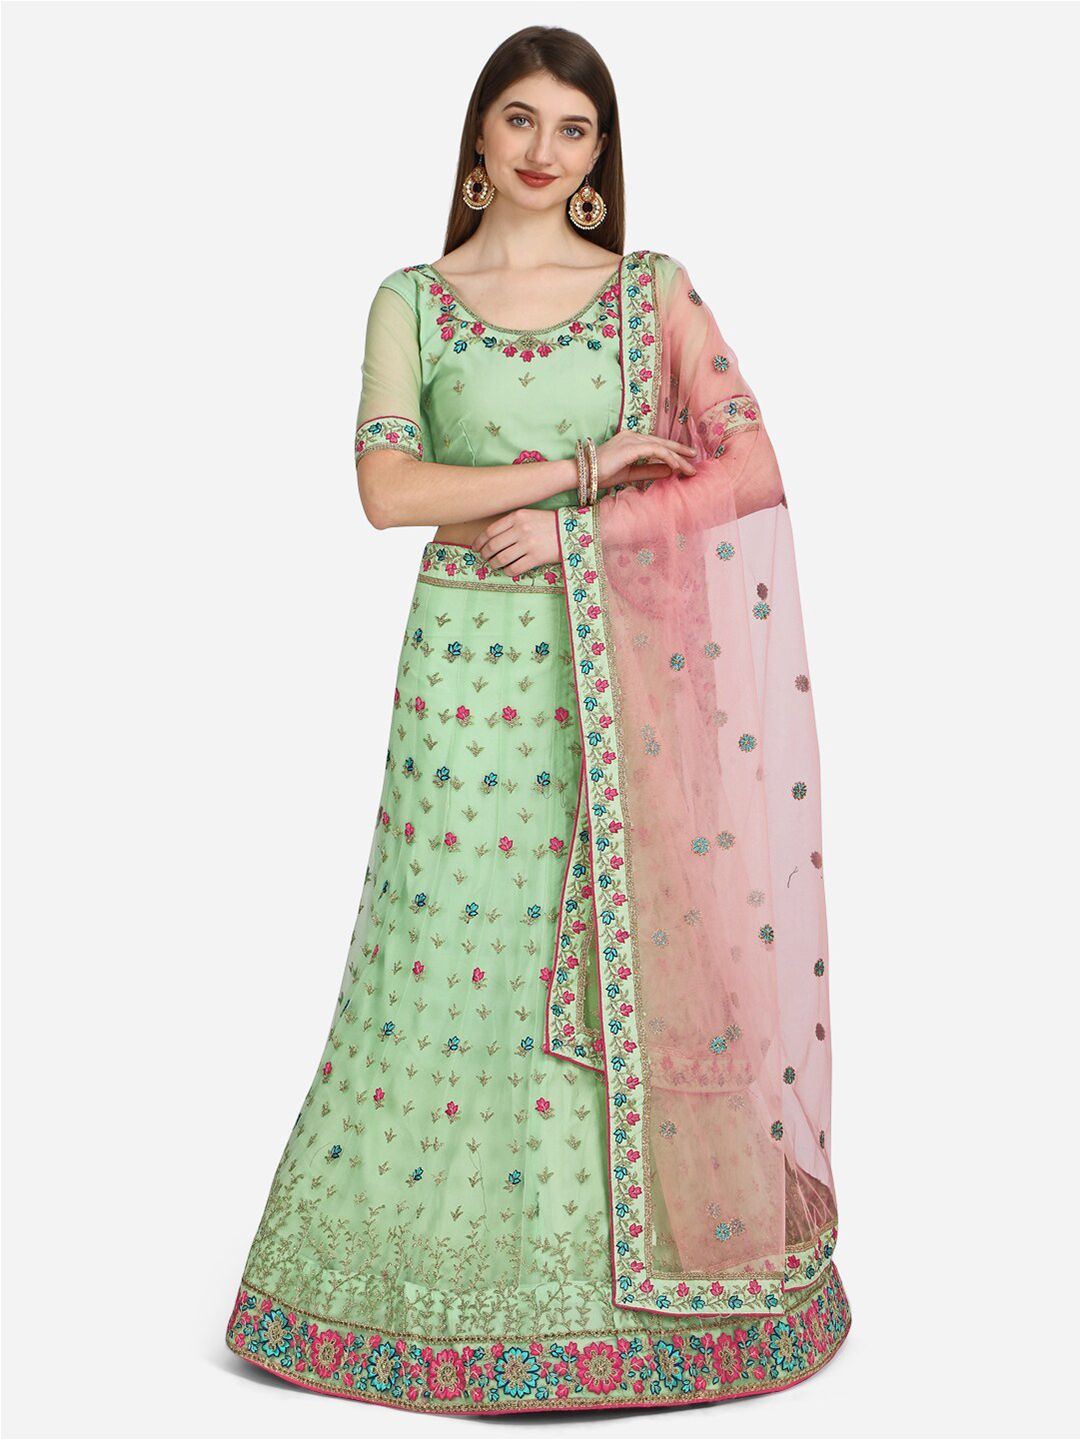 Netram Lime Green & Pink Embroidered Semi-Stitched Lehenga  Set Price in India